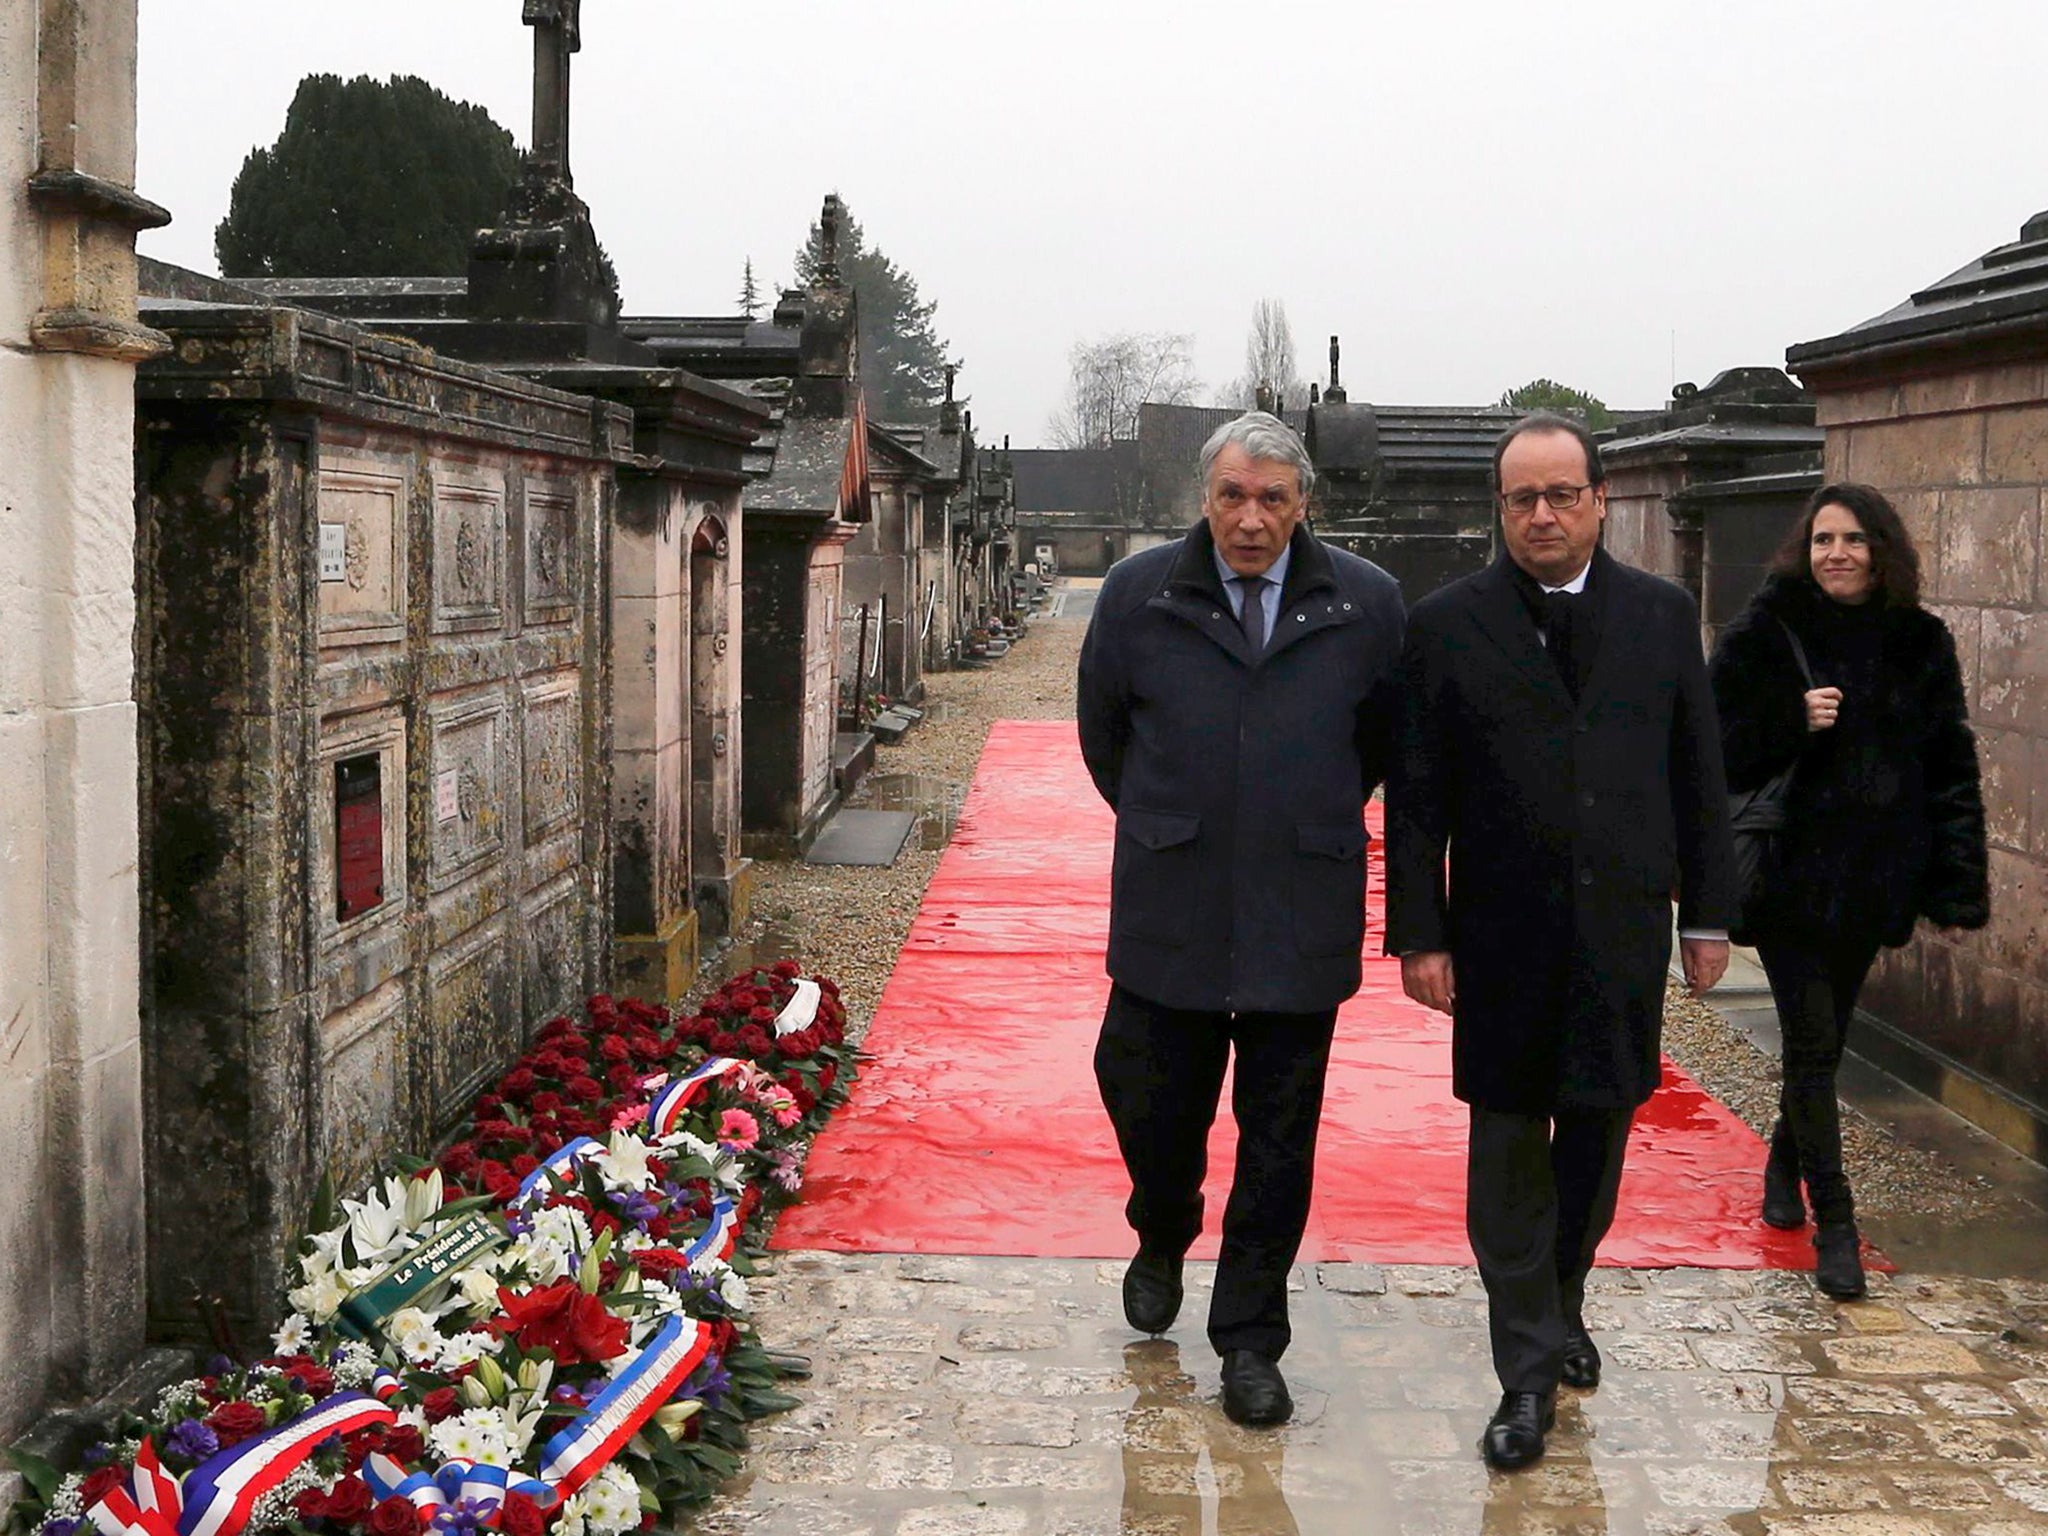 French President Francois Hollande (C), Gilbert Mitterrand (L) and Mazarine Pingeot arrive at the cemetery to attend a ceremony marking the 20th anniversary of the death of former French President Francois Mitterrand in Jarnac, France